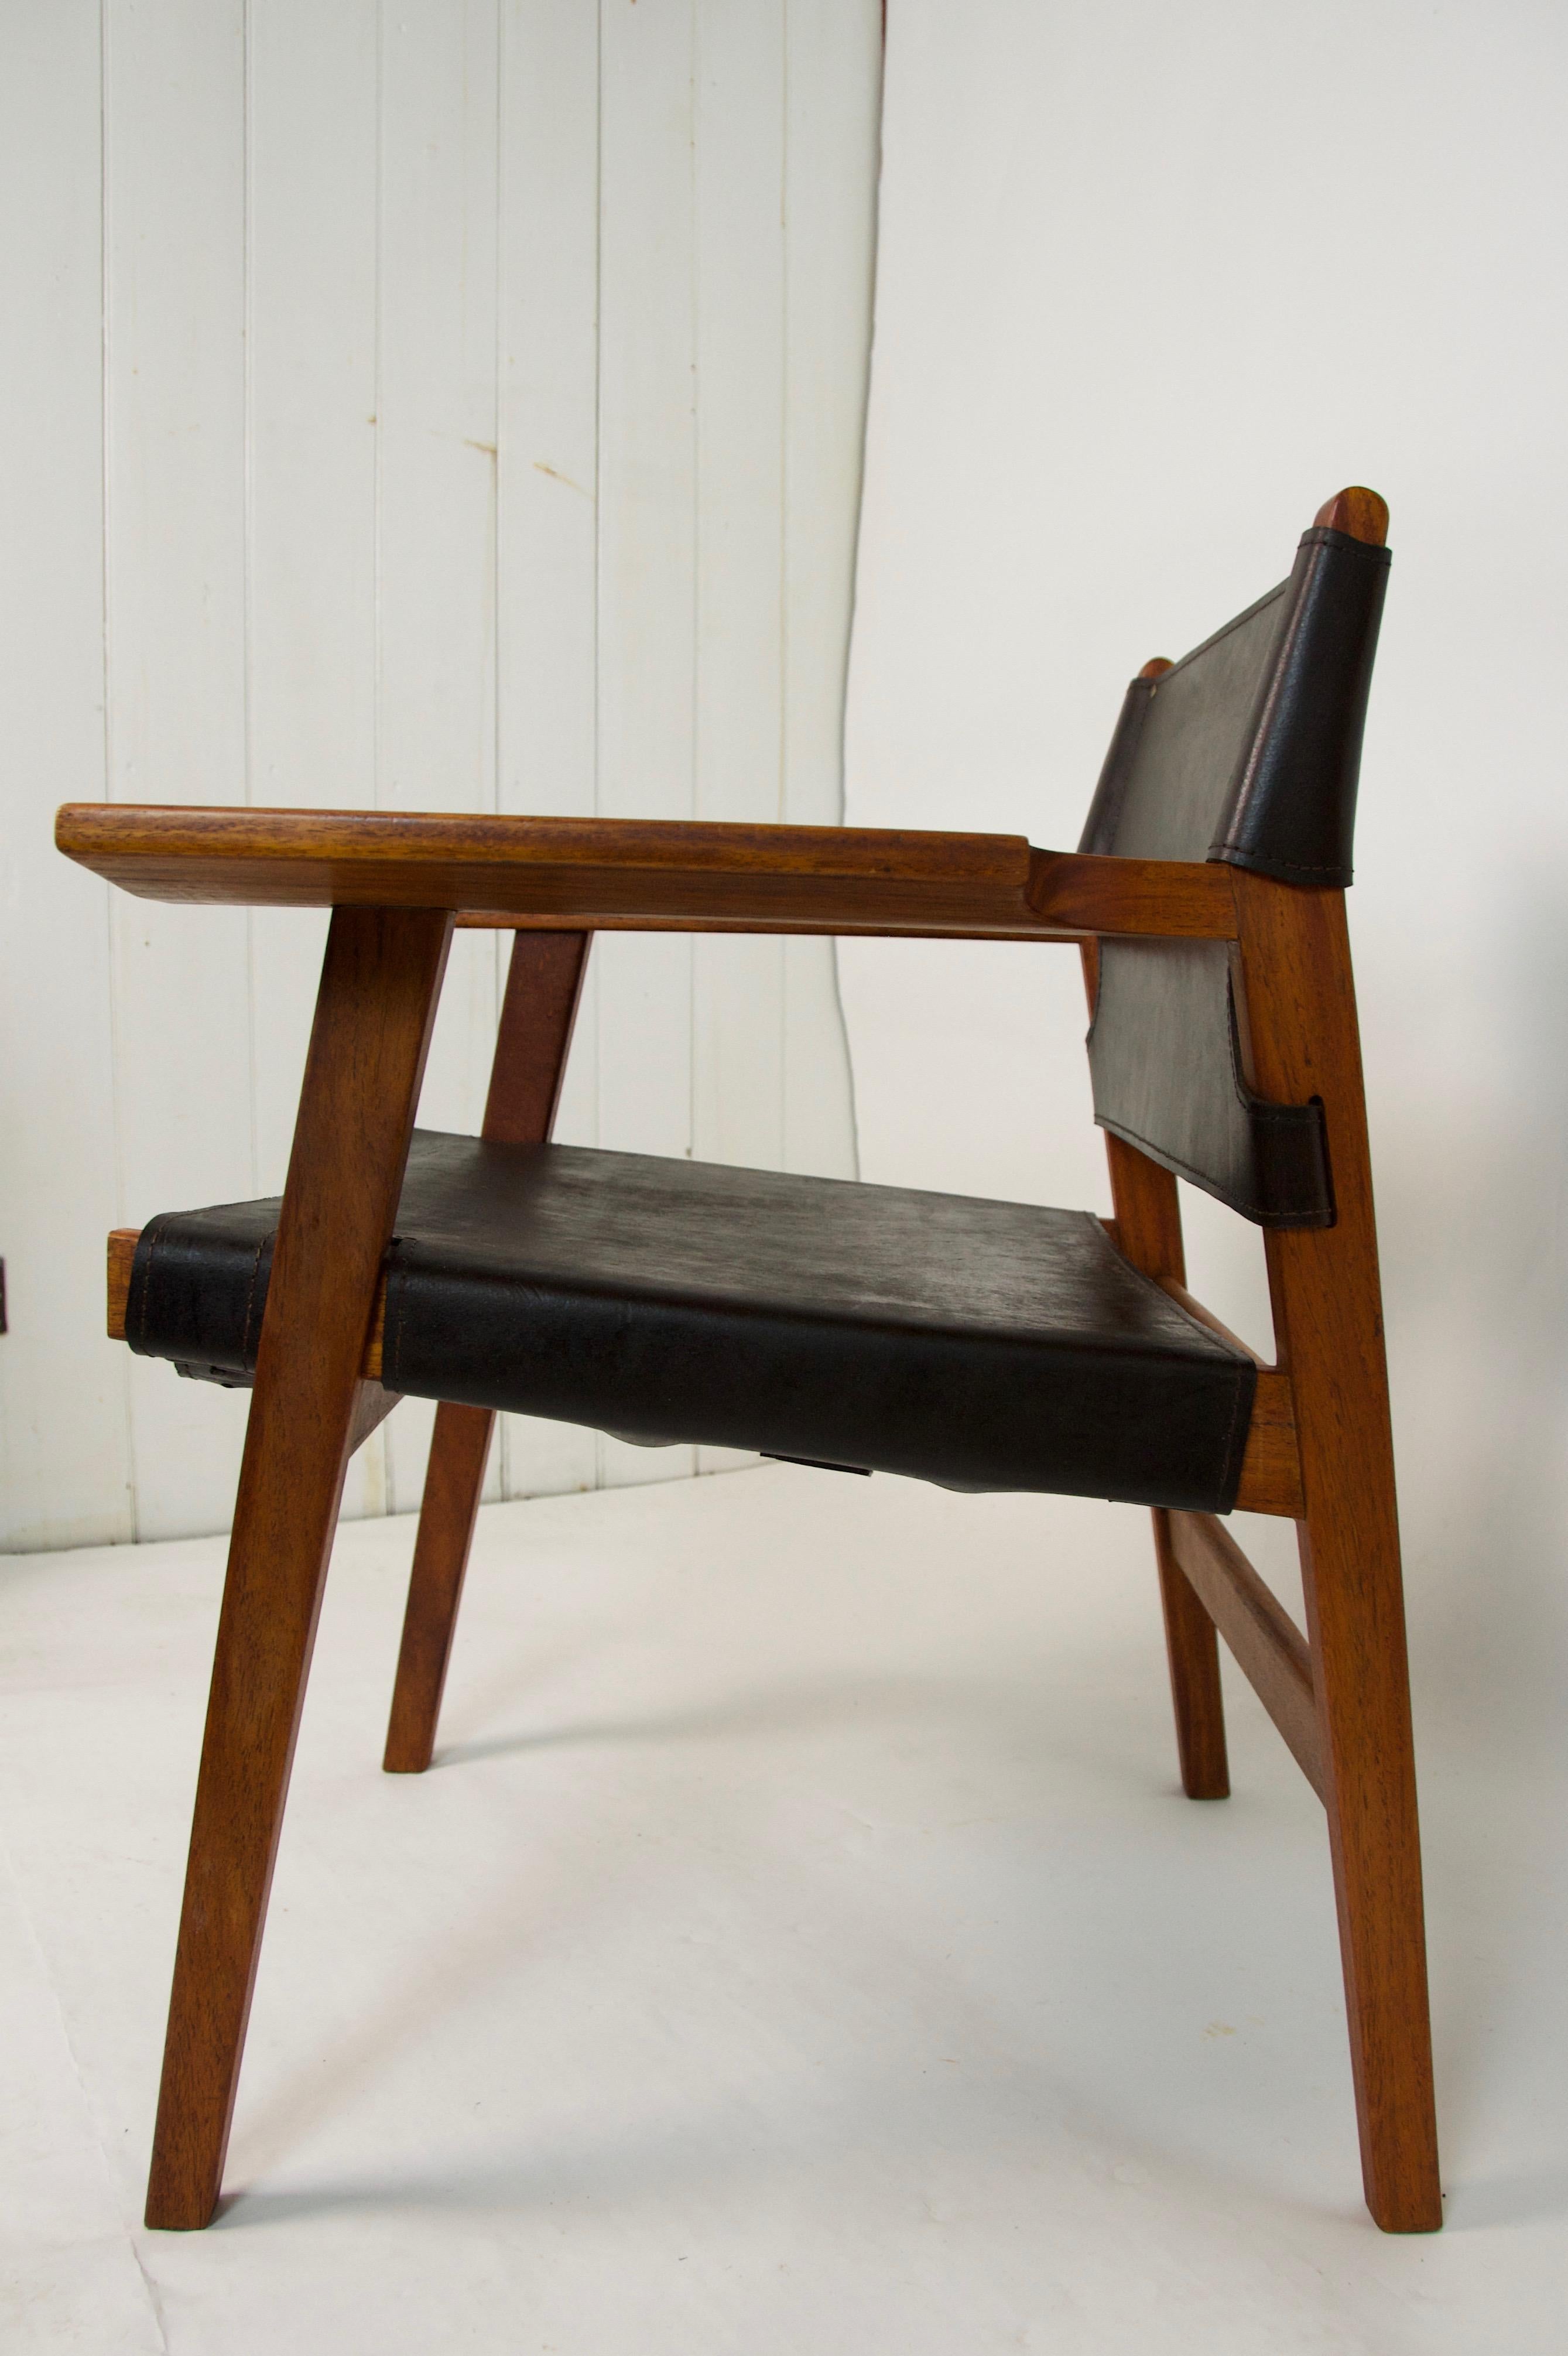 Borge Mogenson style armchair in teak not oak. The similarity to his 